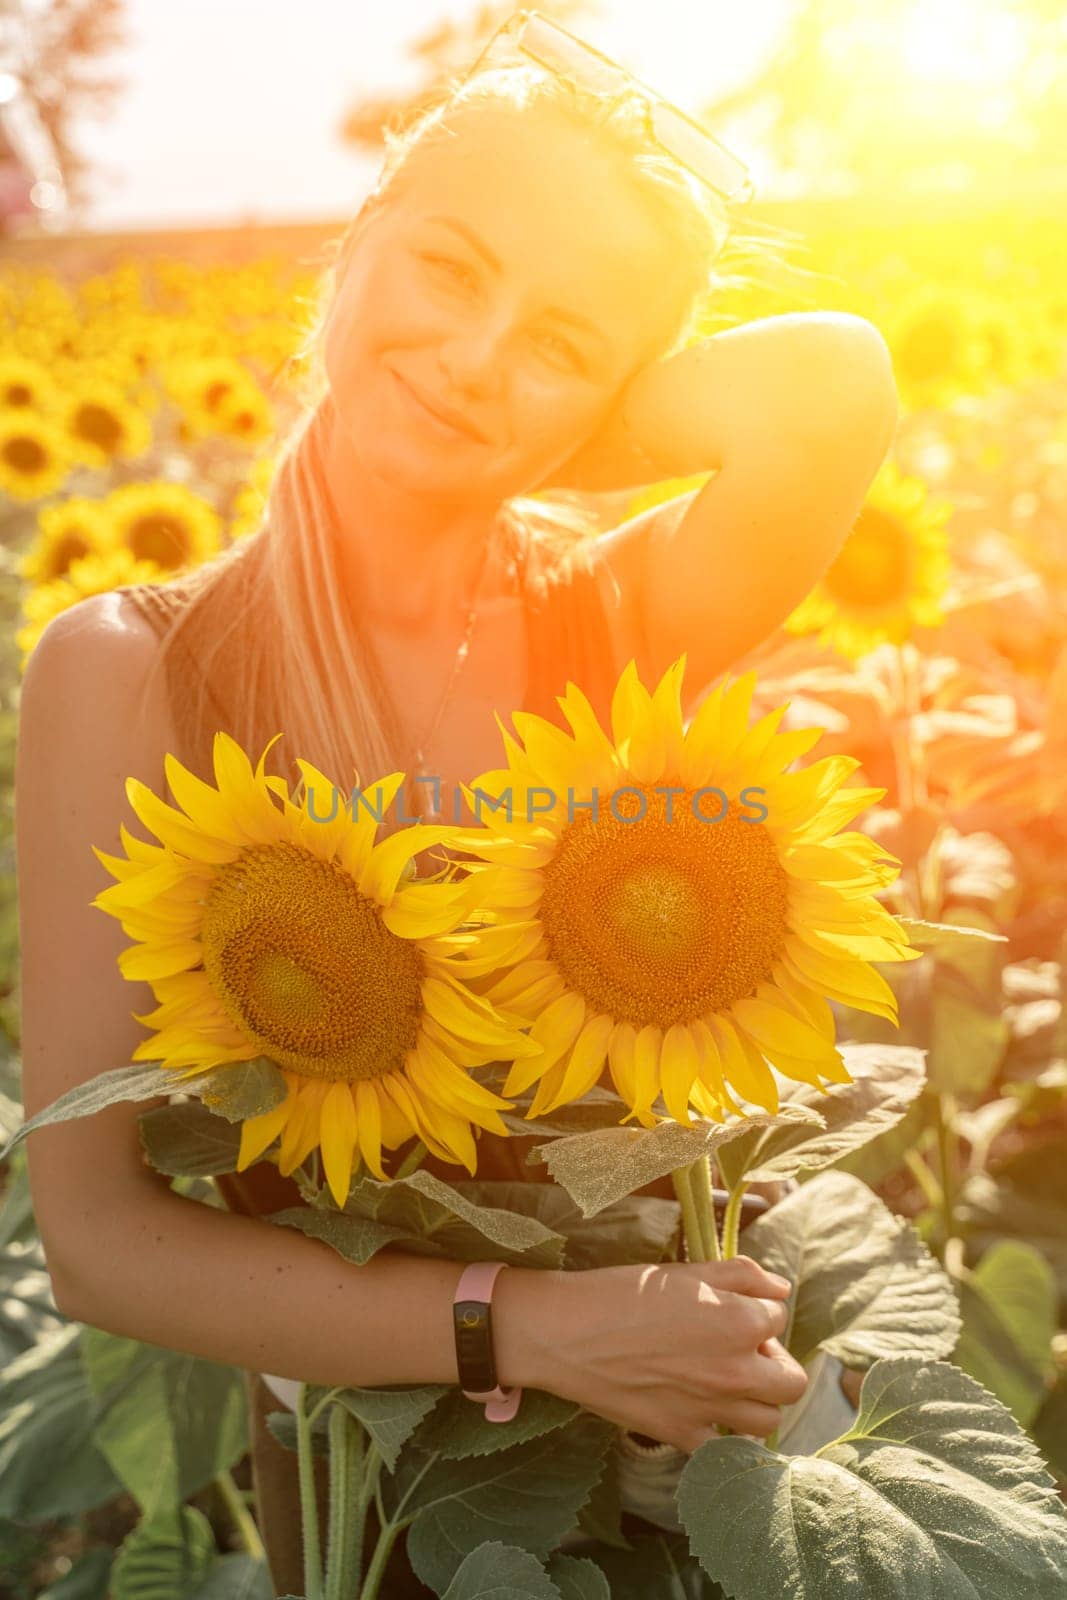 Beautiful woman in sunflower field at sunset enjoying summer nature. Attractive blonde with long healthy hair. by Matiunina